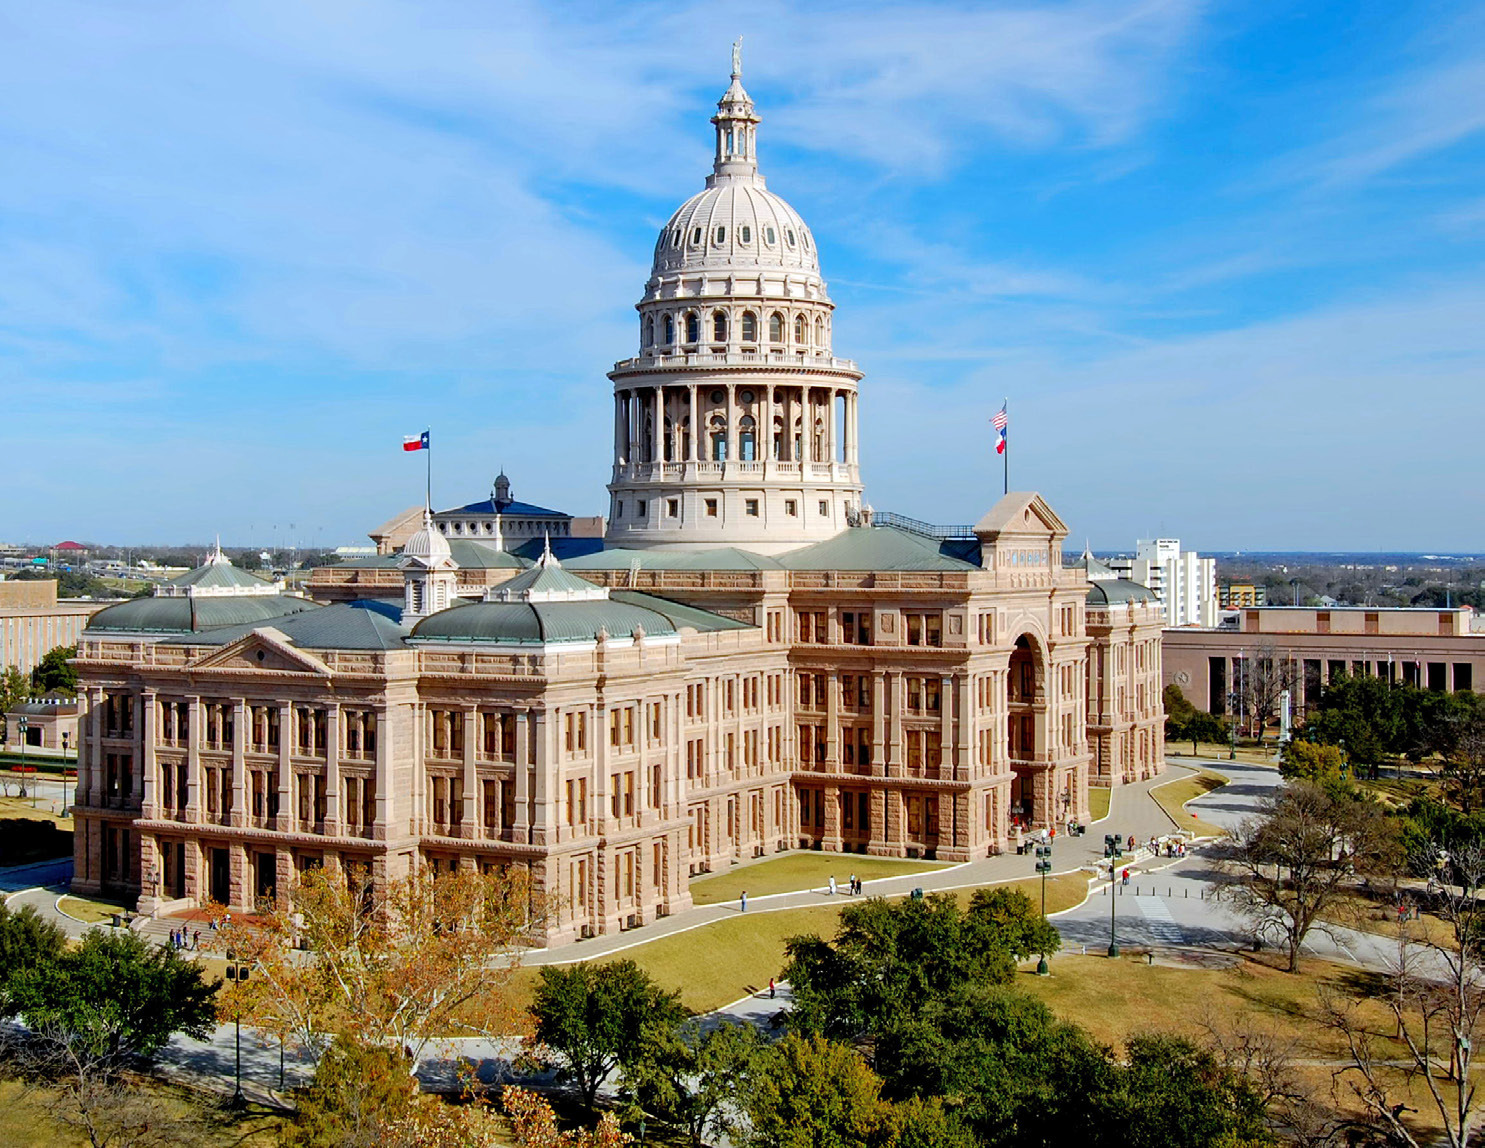 The 88th Texas legislative session has begun. Here’s what to know